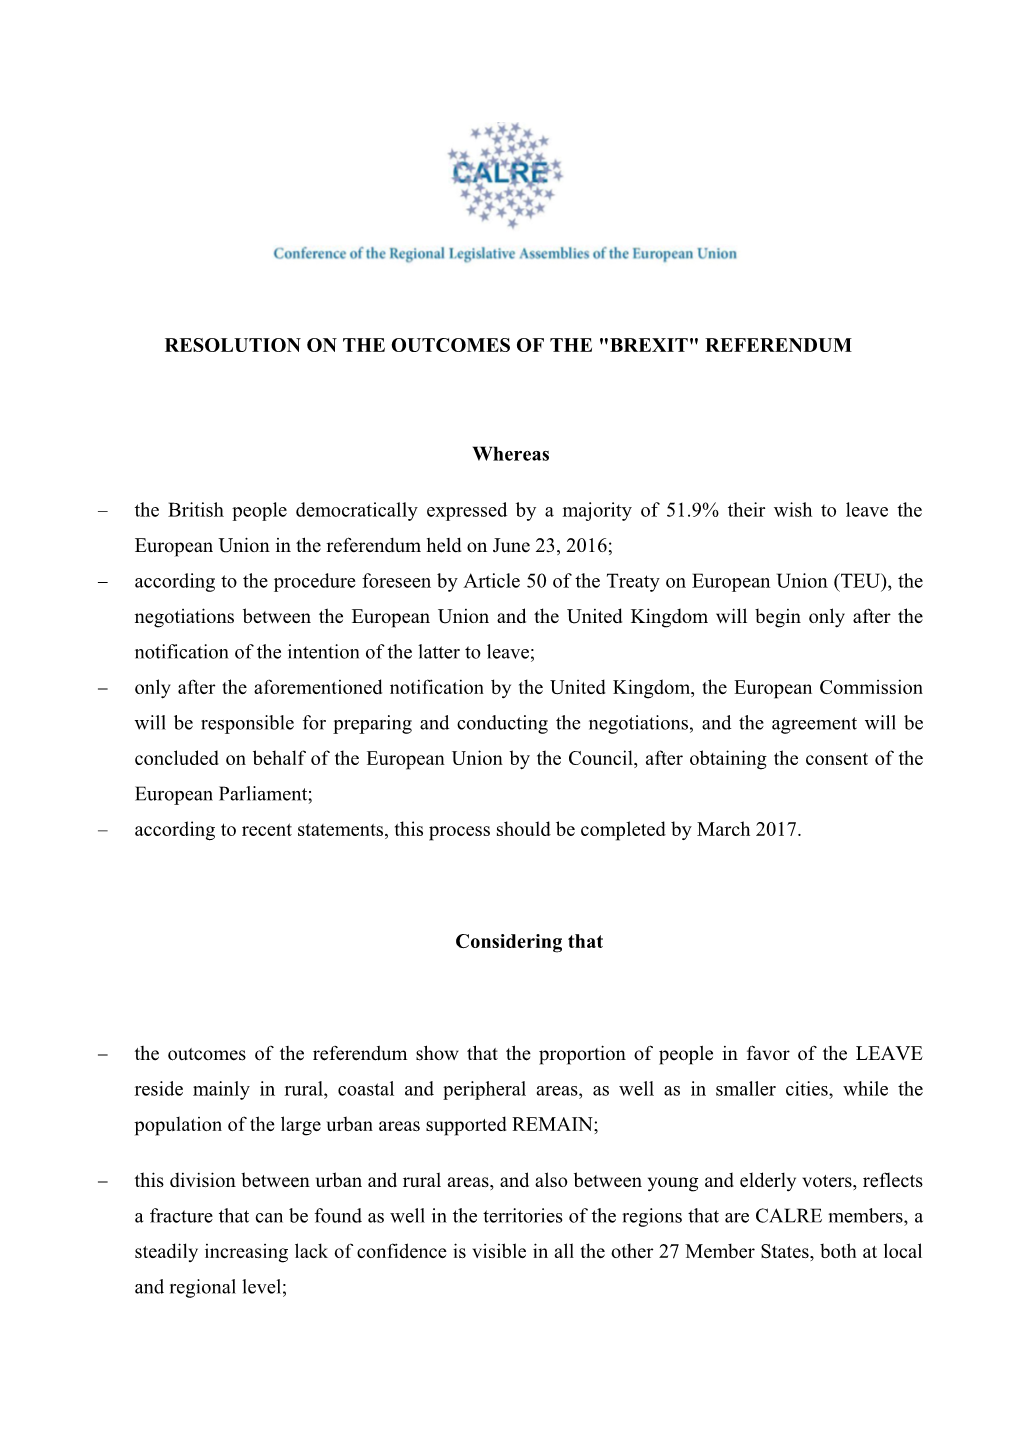 Resolution on the Outcomes of the Brexit Referendum